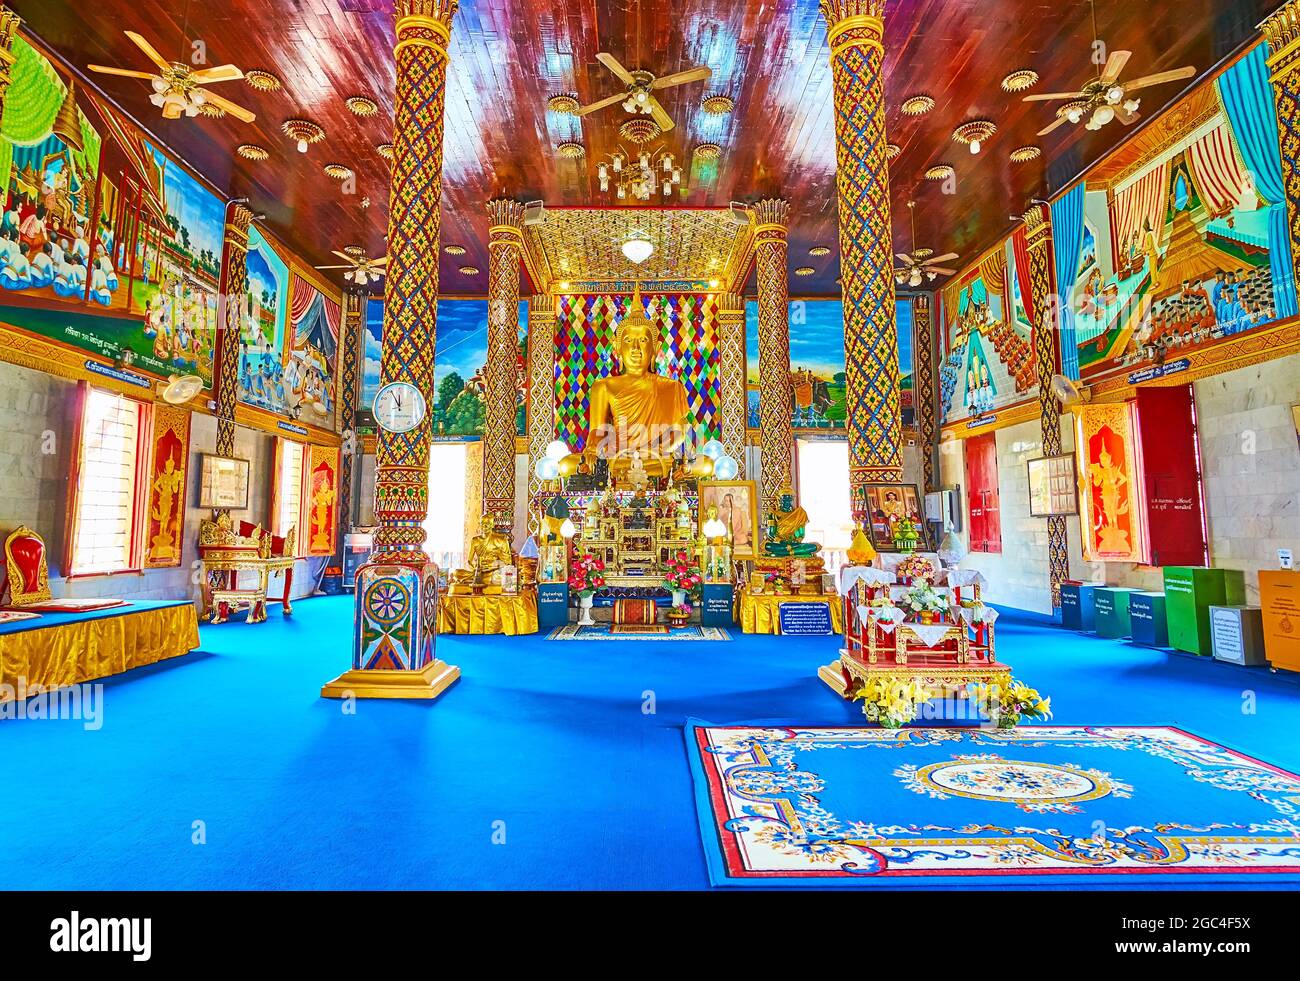 LAMPHUN, THAILAND - MAY 8, 2019: The prayer hall of Wat Chammathewi Assembly Hall (Viharn) with ornate pillars, wooden ceiling and golden Buddha on th Stock Photo